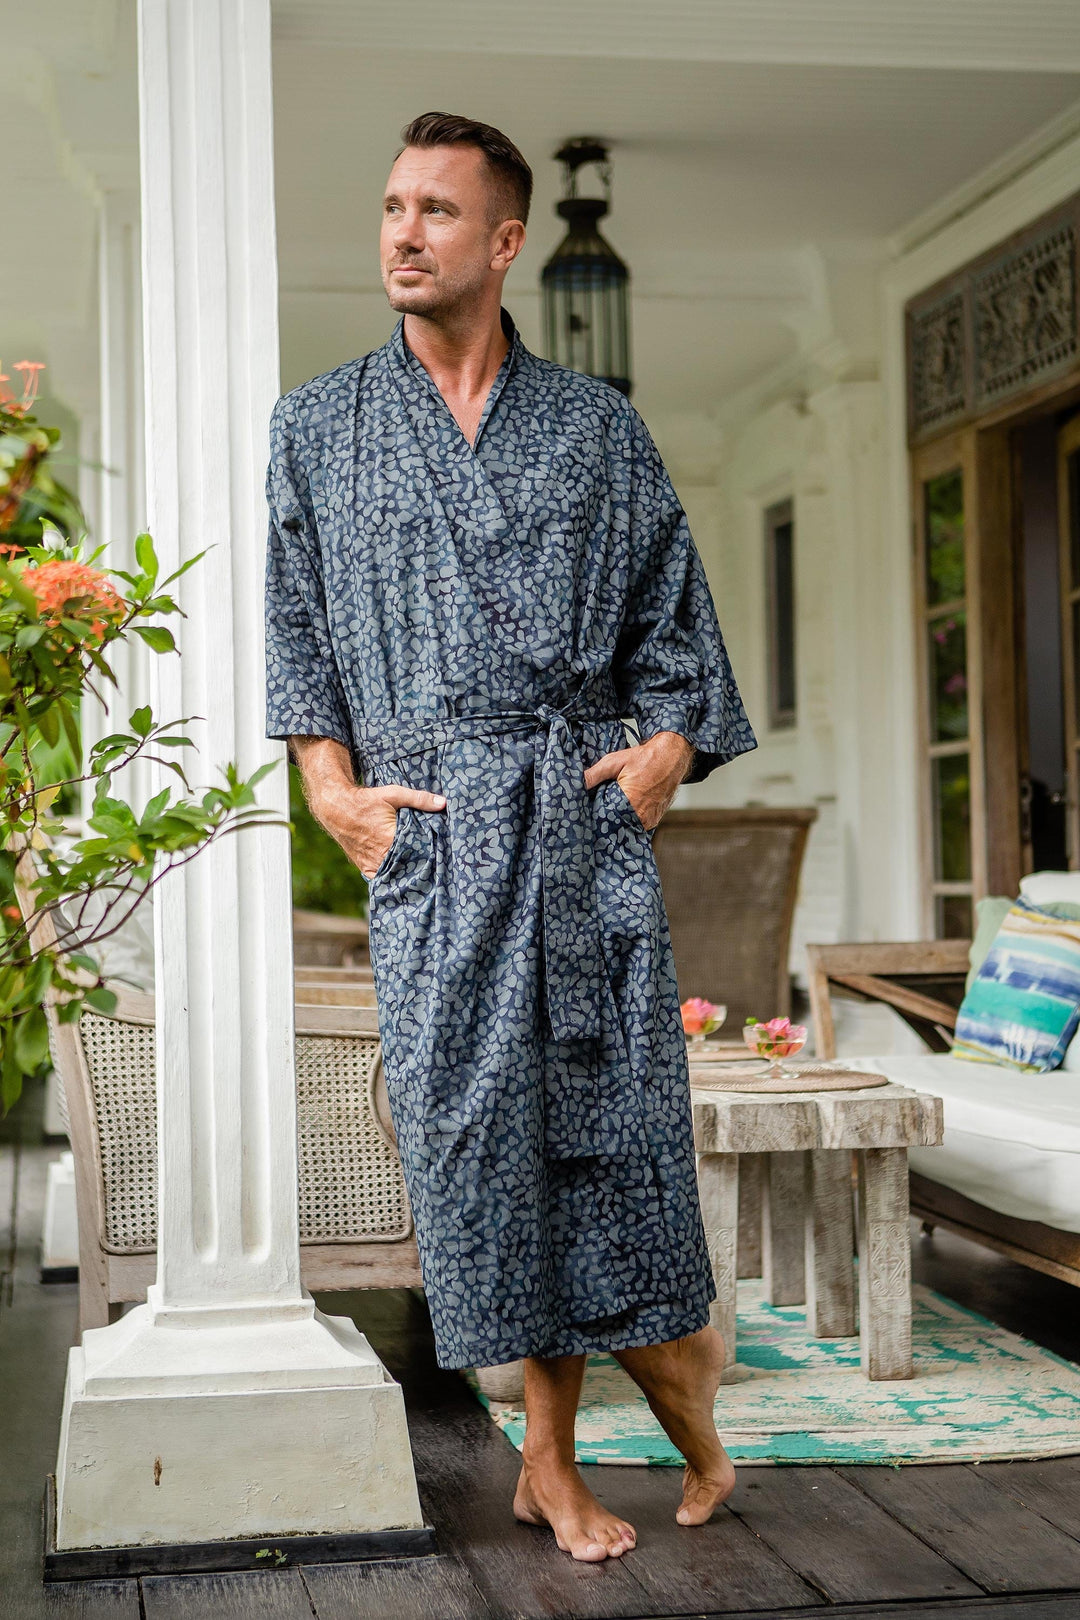 Long Terry Terry Cotton Towelling Robe 100% Cotton, Thick, Absorbent,  Lightweight, And Comfortable For Men And Women Includes Waffle Towel,  Bathrobe, Sleepwear, Dressing Gown Style 210901 From Dou08, $19.3 |  DHgate.Com |